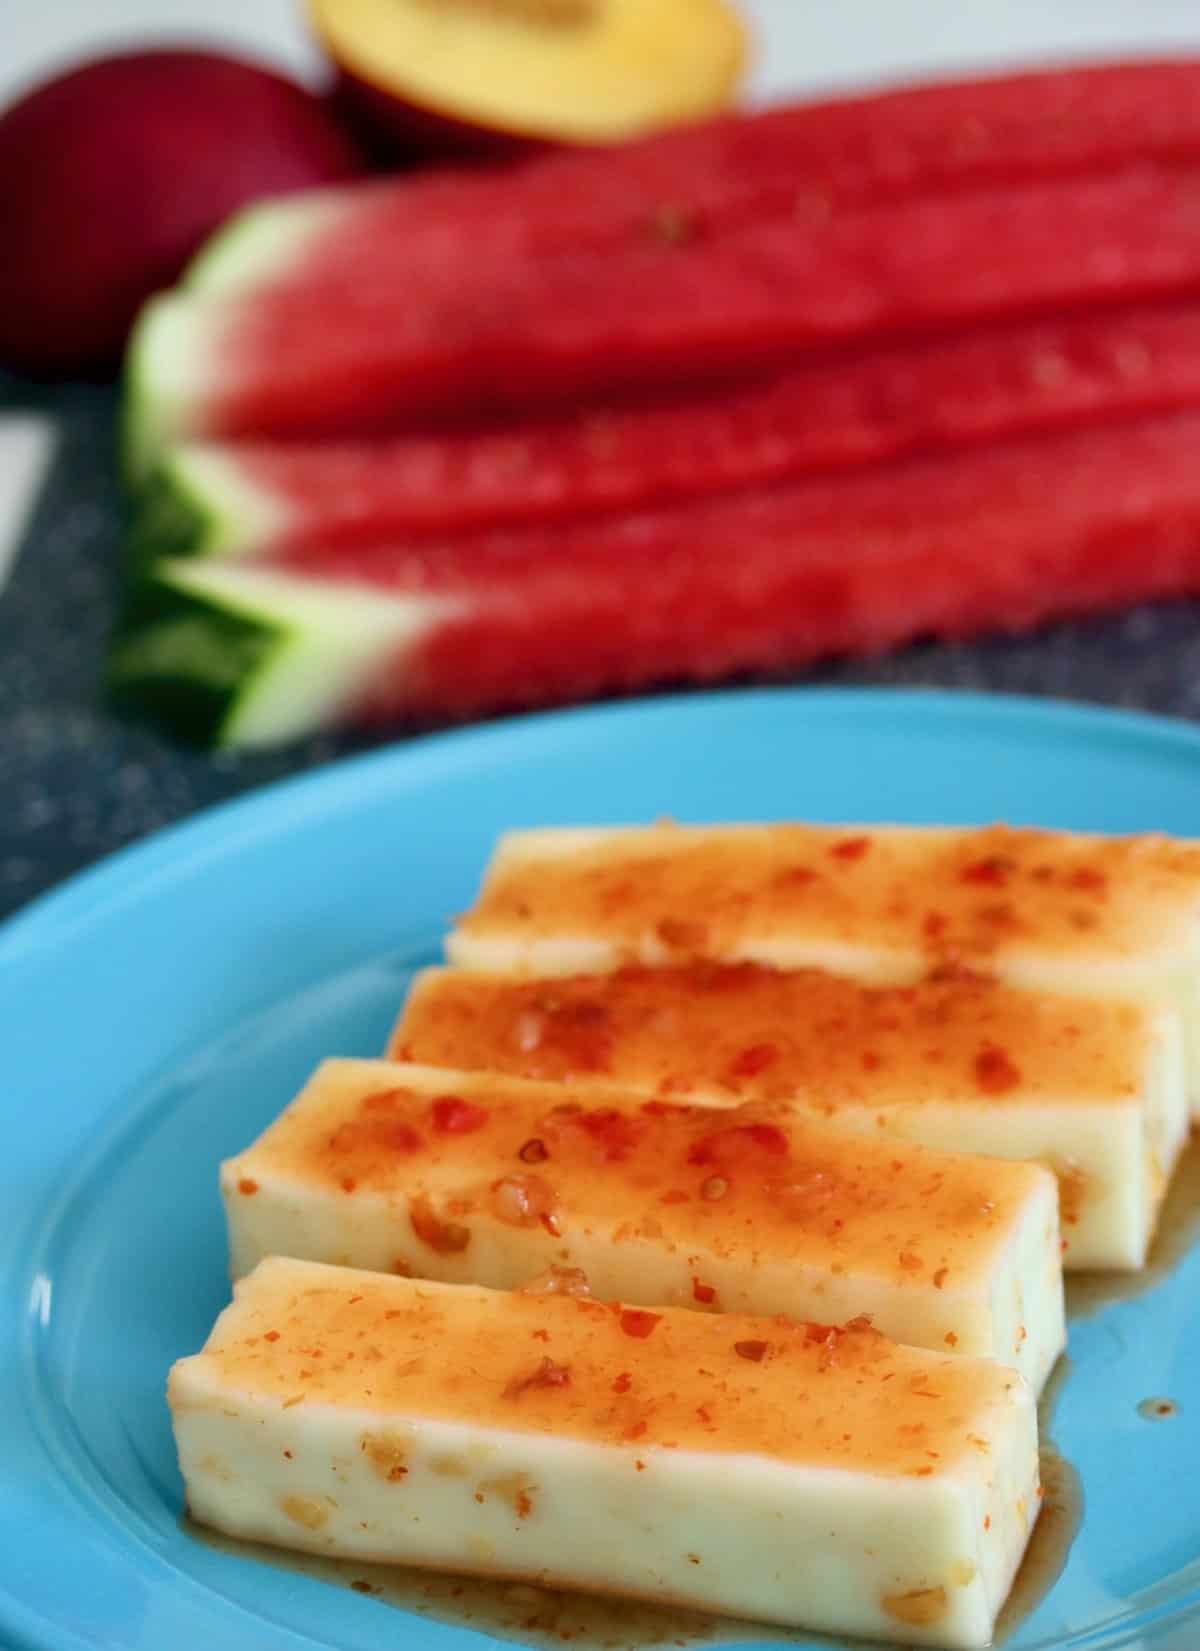 Cut watermelon and paneer marinating in chili sauce on a blue plate.